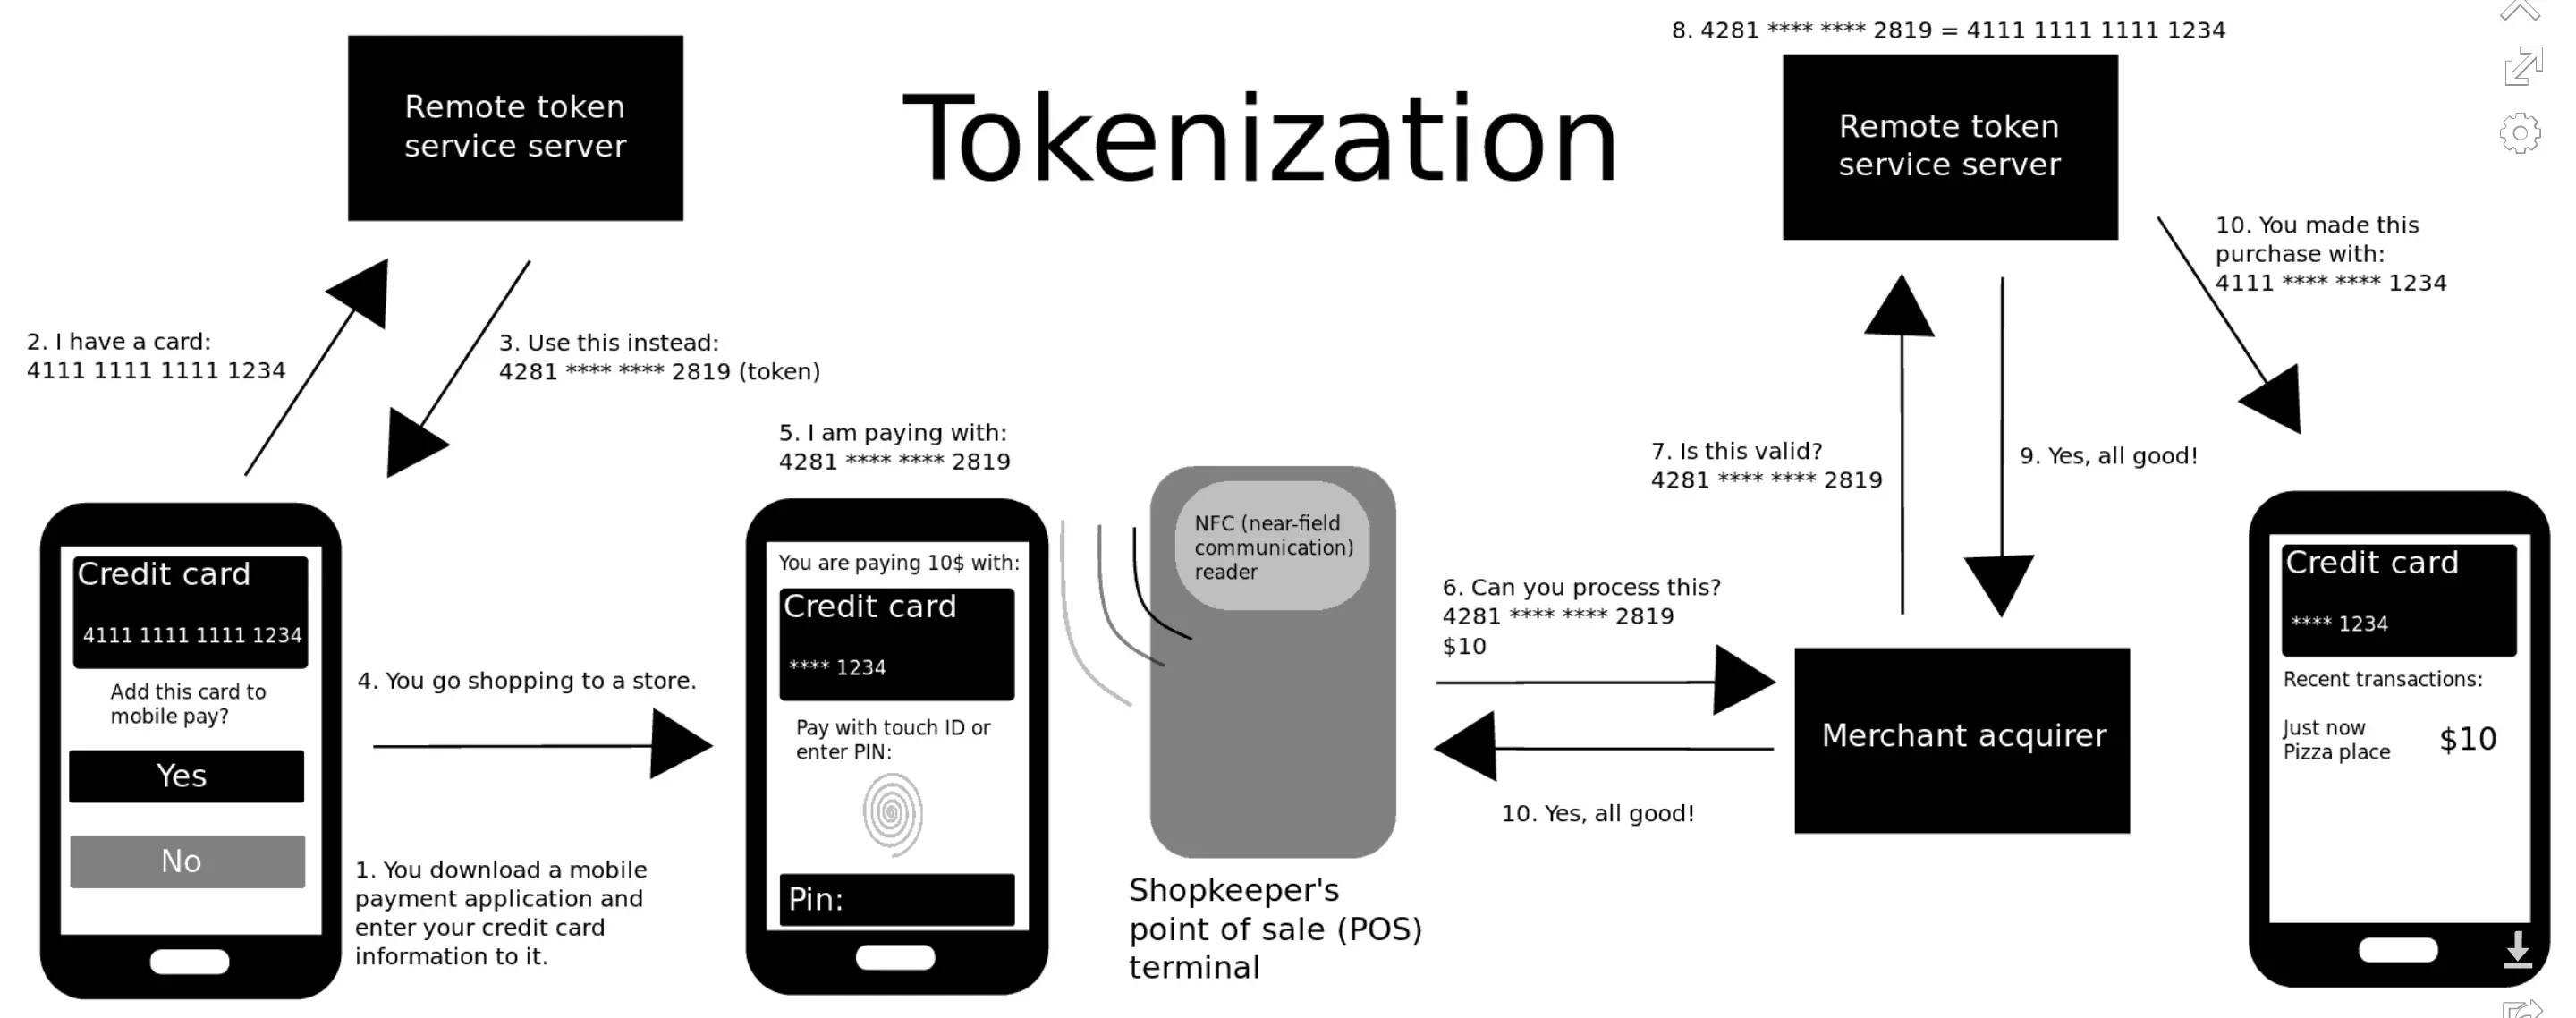 Why is Tokenization important?